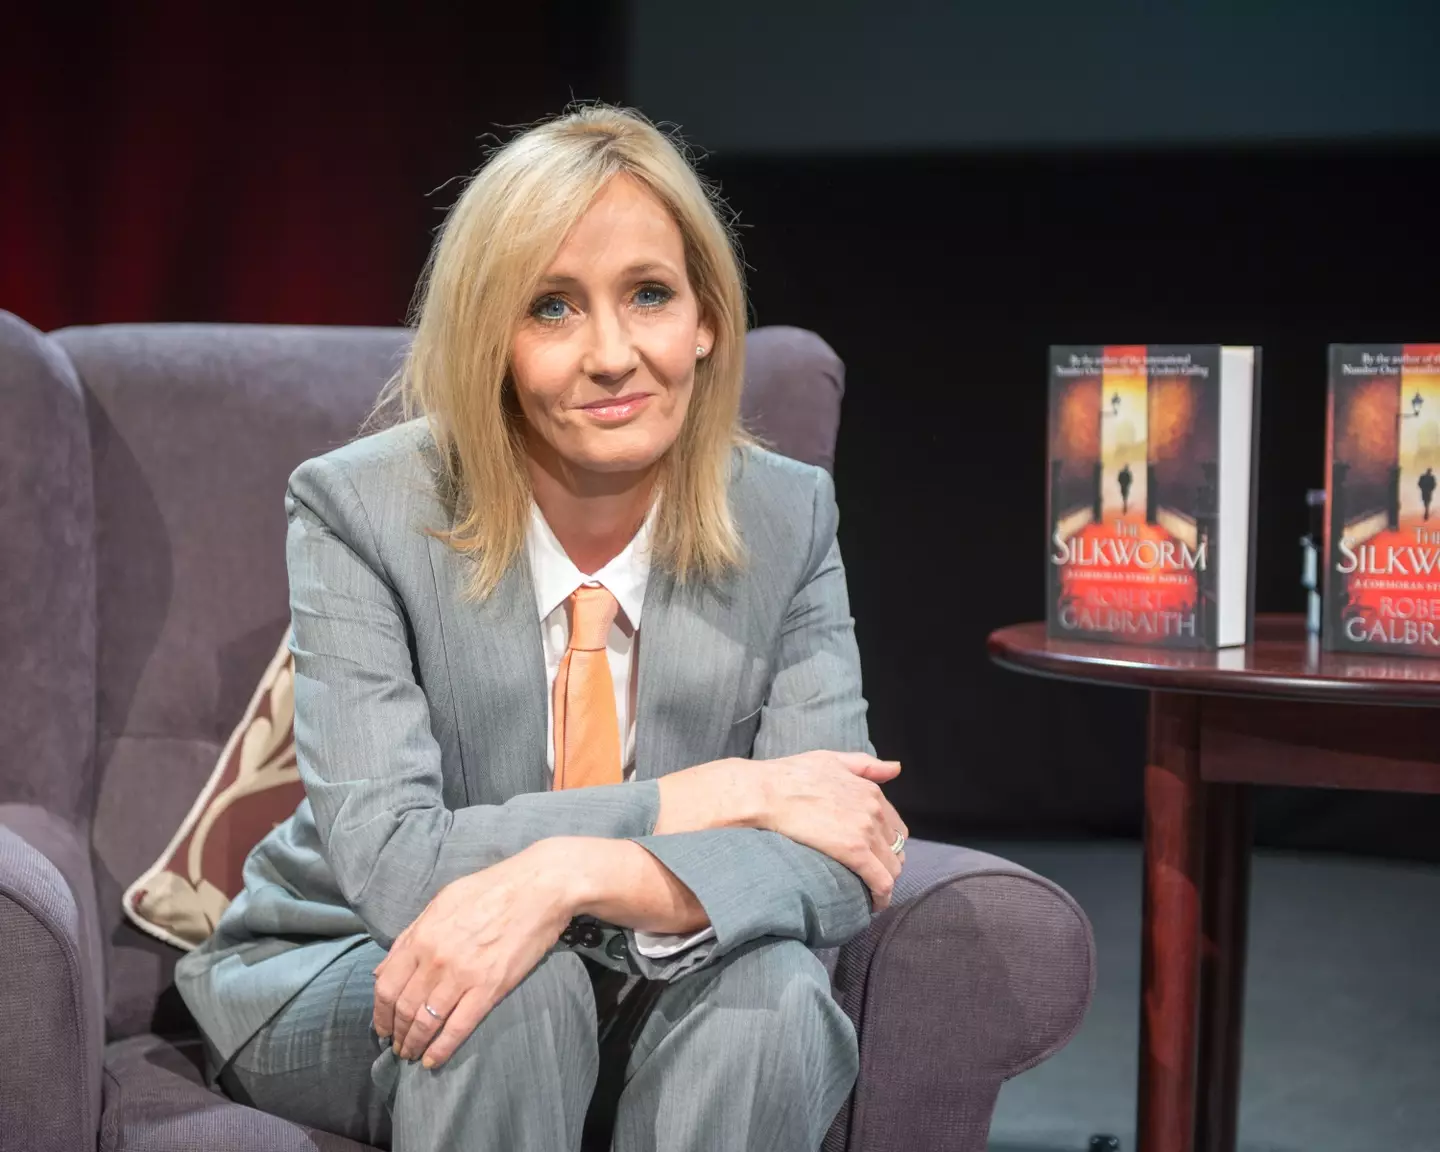 JK Rowling says she got kicked out of a Harry Potter forum when she joined under a fake name.